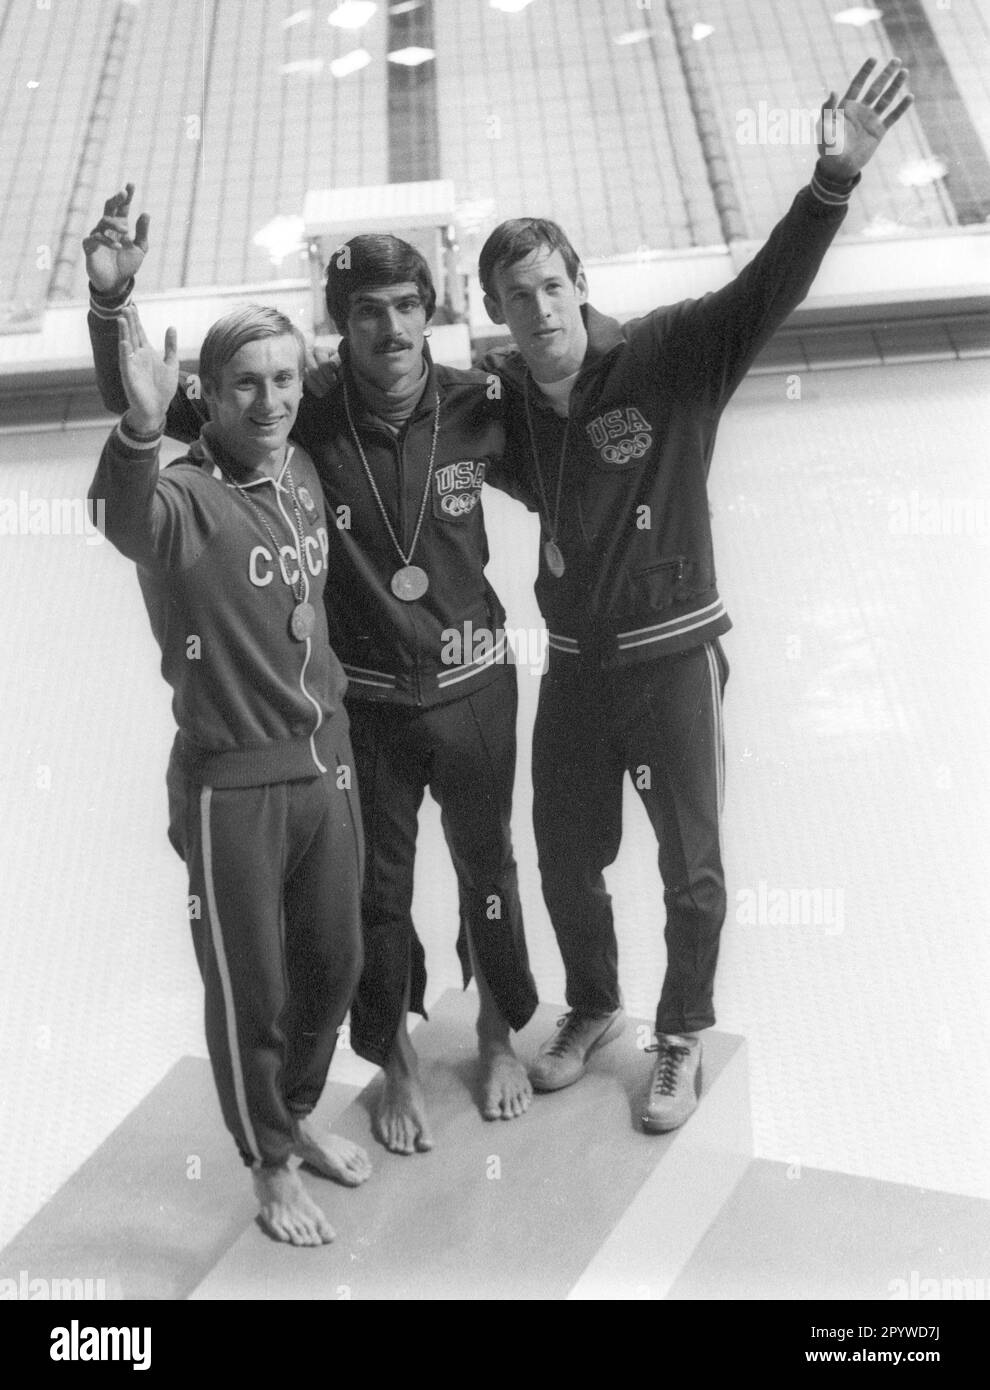 Olympic Games Munich 1972 / Swimming: Award ceremony 100m freestyle: Mark Spitz (gold), Jerry Heidenreich (silver/both USA) and Vladimir Bure (USSR/bronze) 03.09.1972. [automated translation] Stock Photo